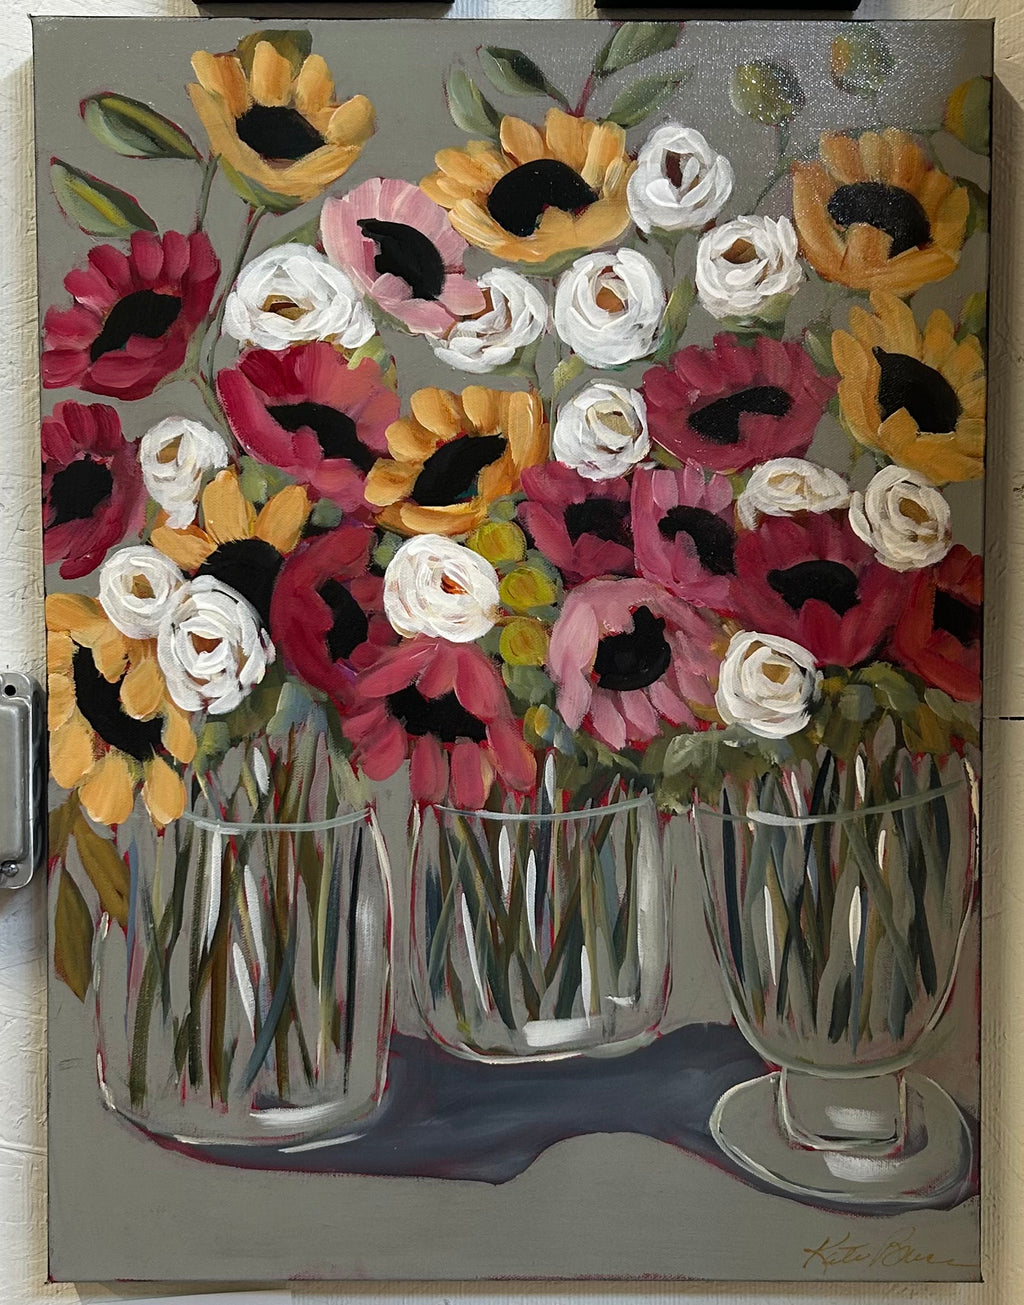 18x24 Three vases original acrylic painting by Kate Bruce